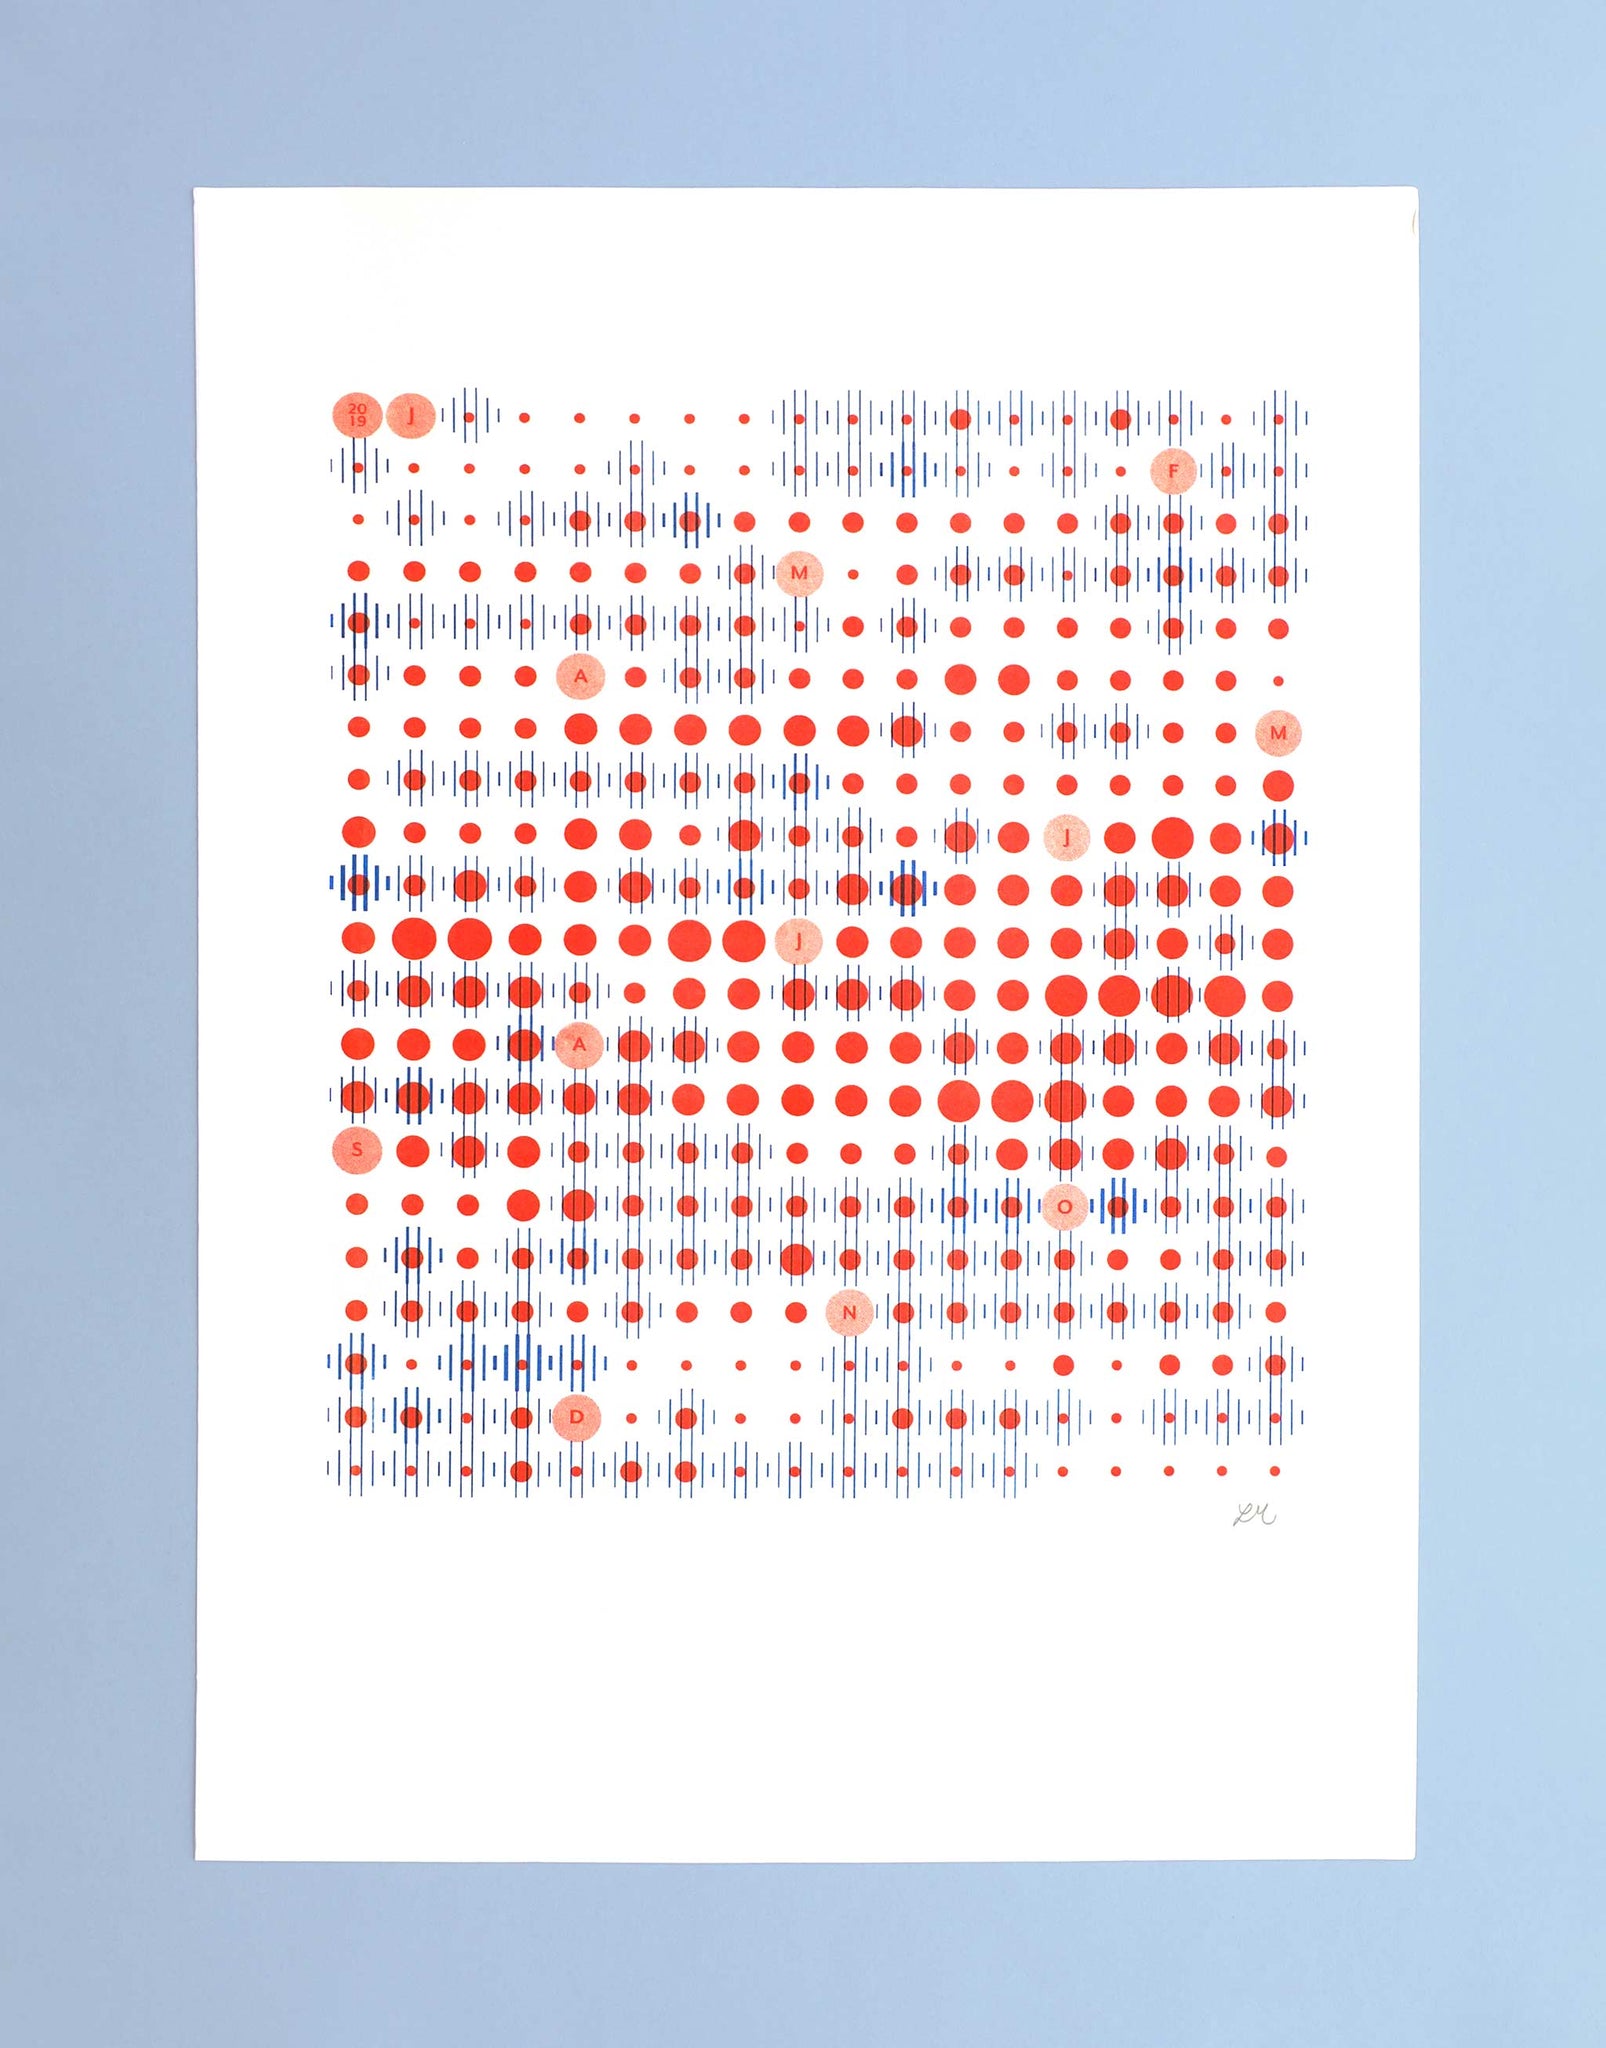 Flat lay of data-visualisation print of Amsterdam weather patterns in blue lines and red dots in grid formation on white paper.